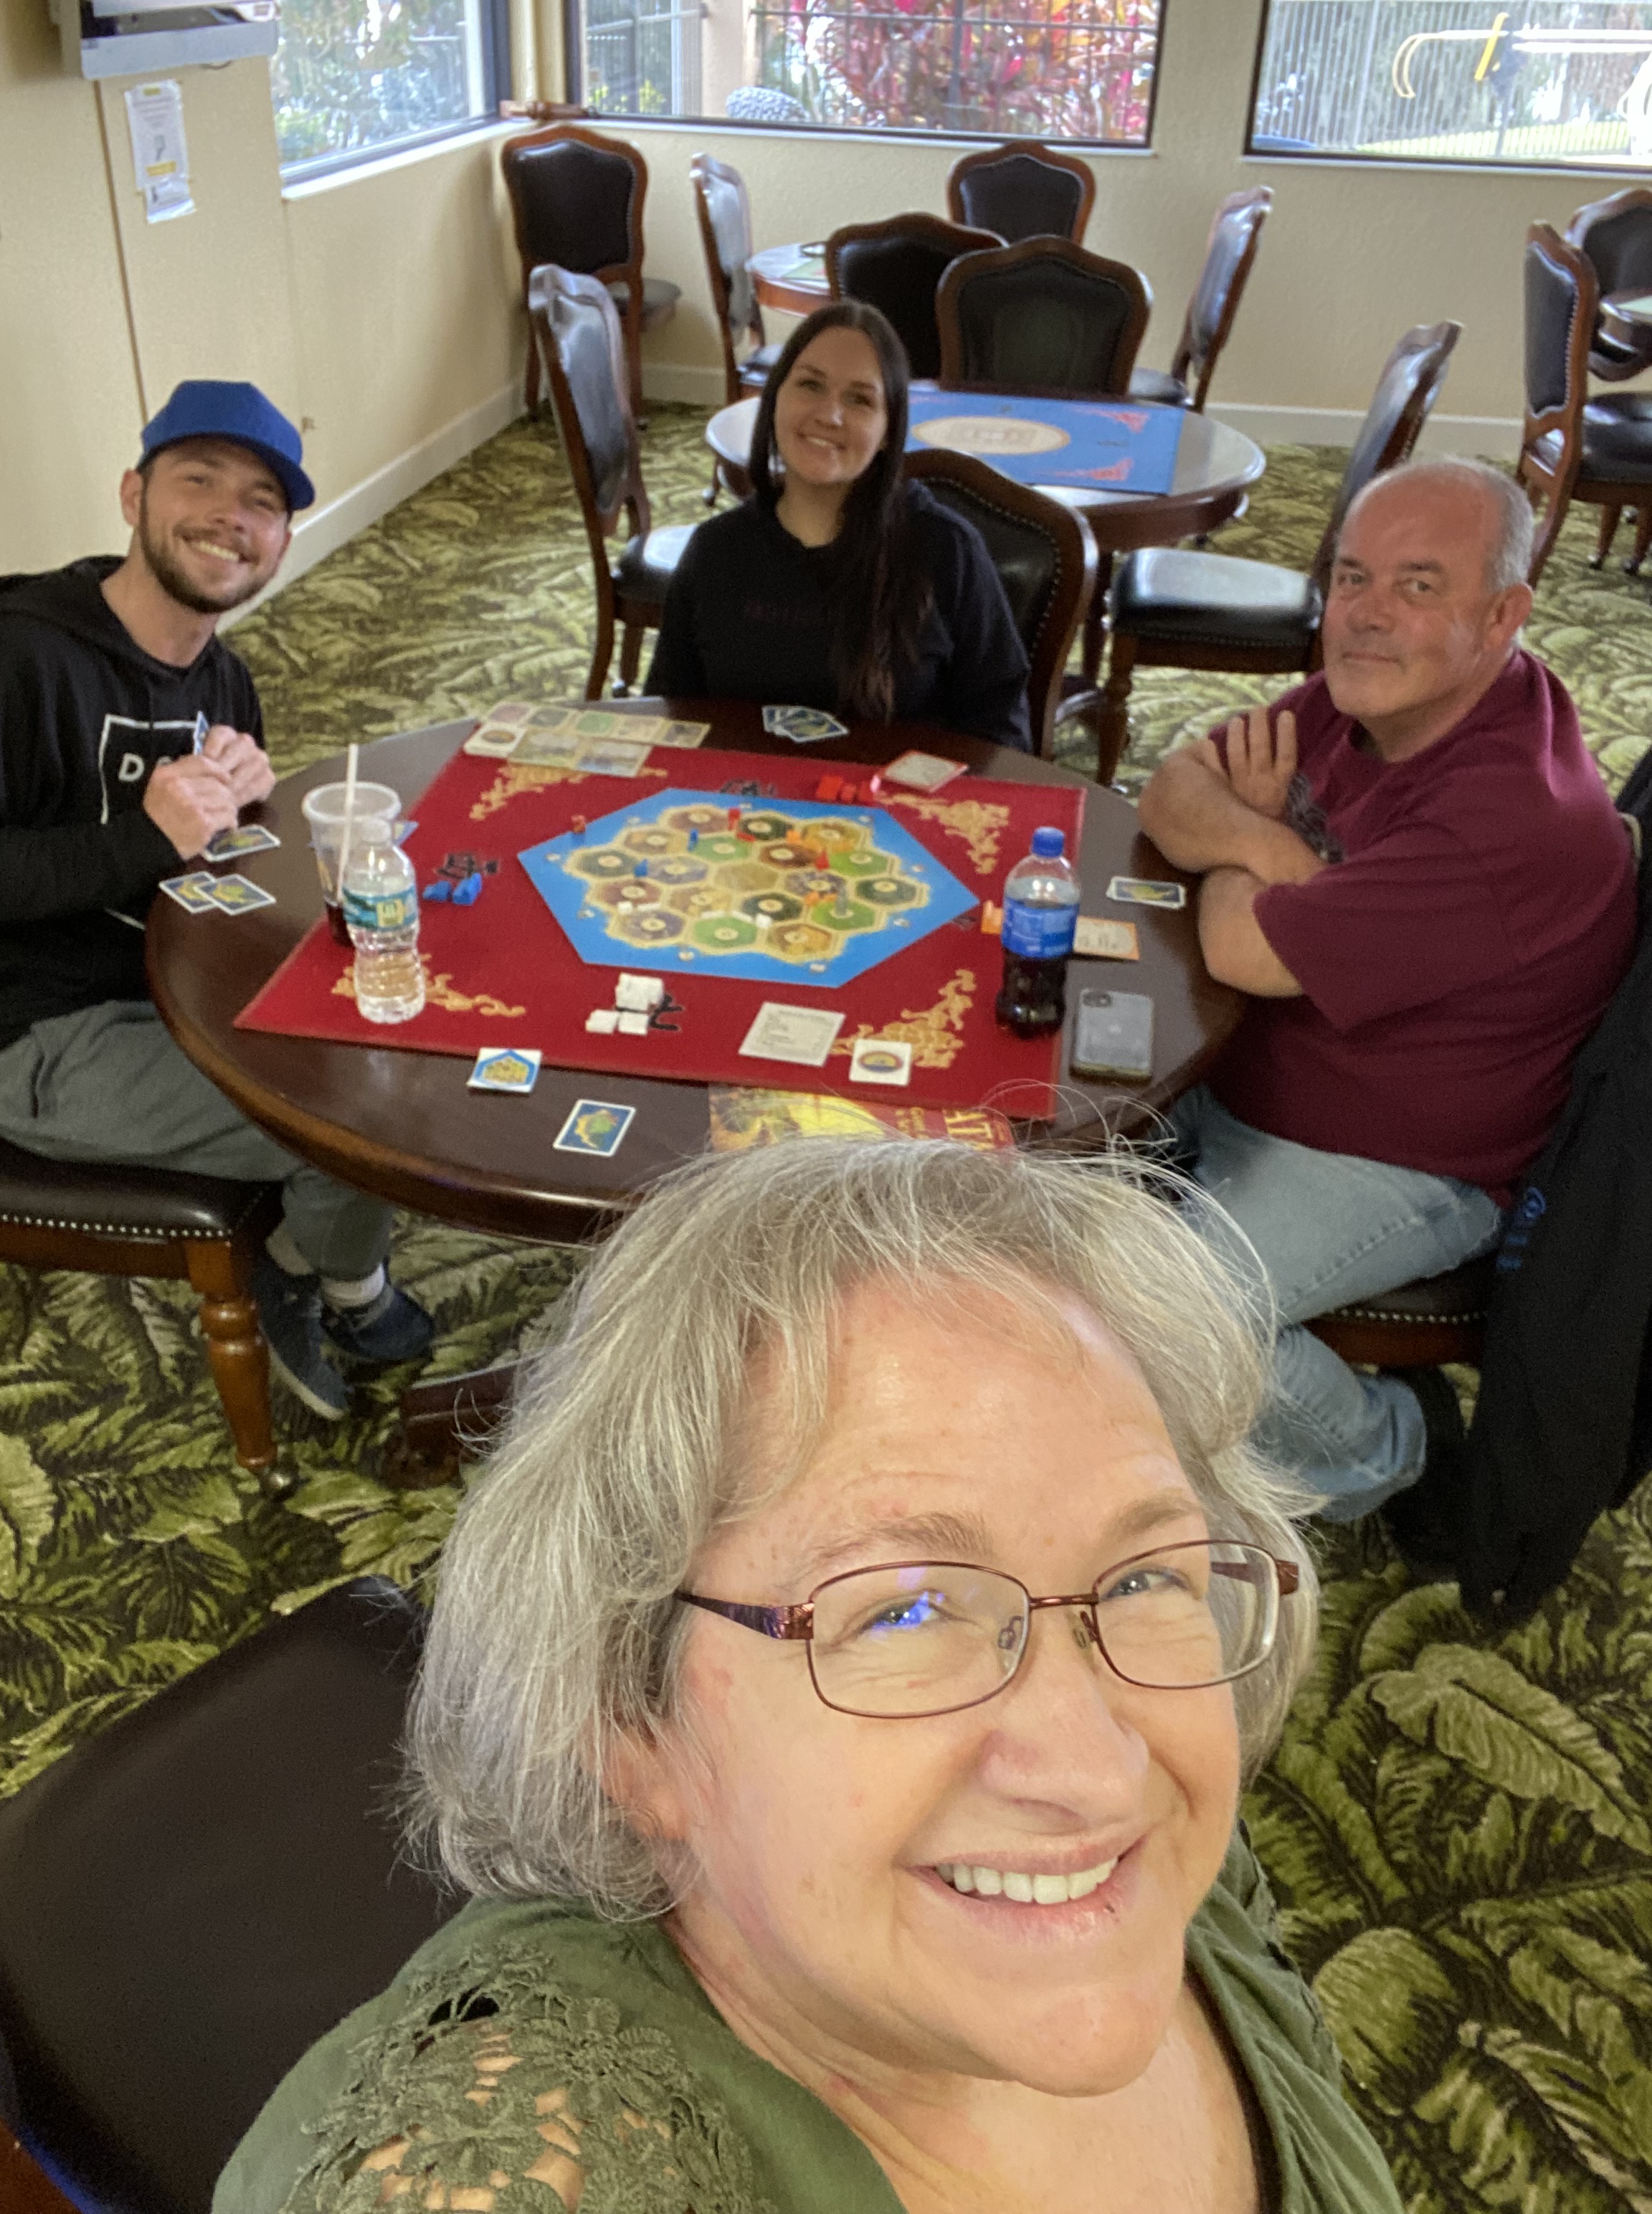 Amy, Ken, Jorjia, and Michael at a table playing Catan, the board game. In the clubhouse, with other tables in the background. 3 windows behind them. 